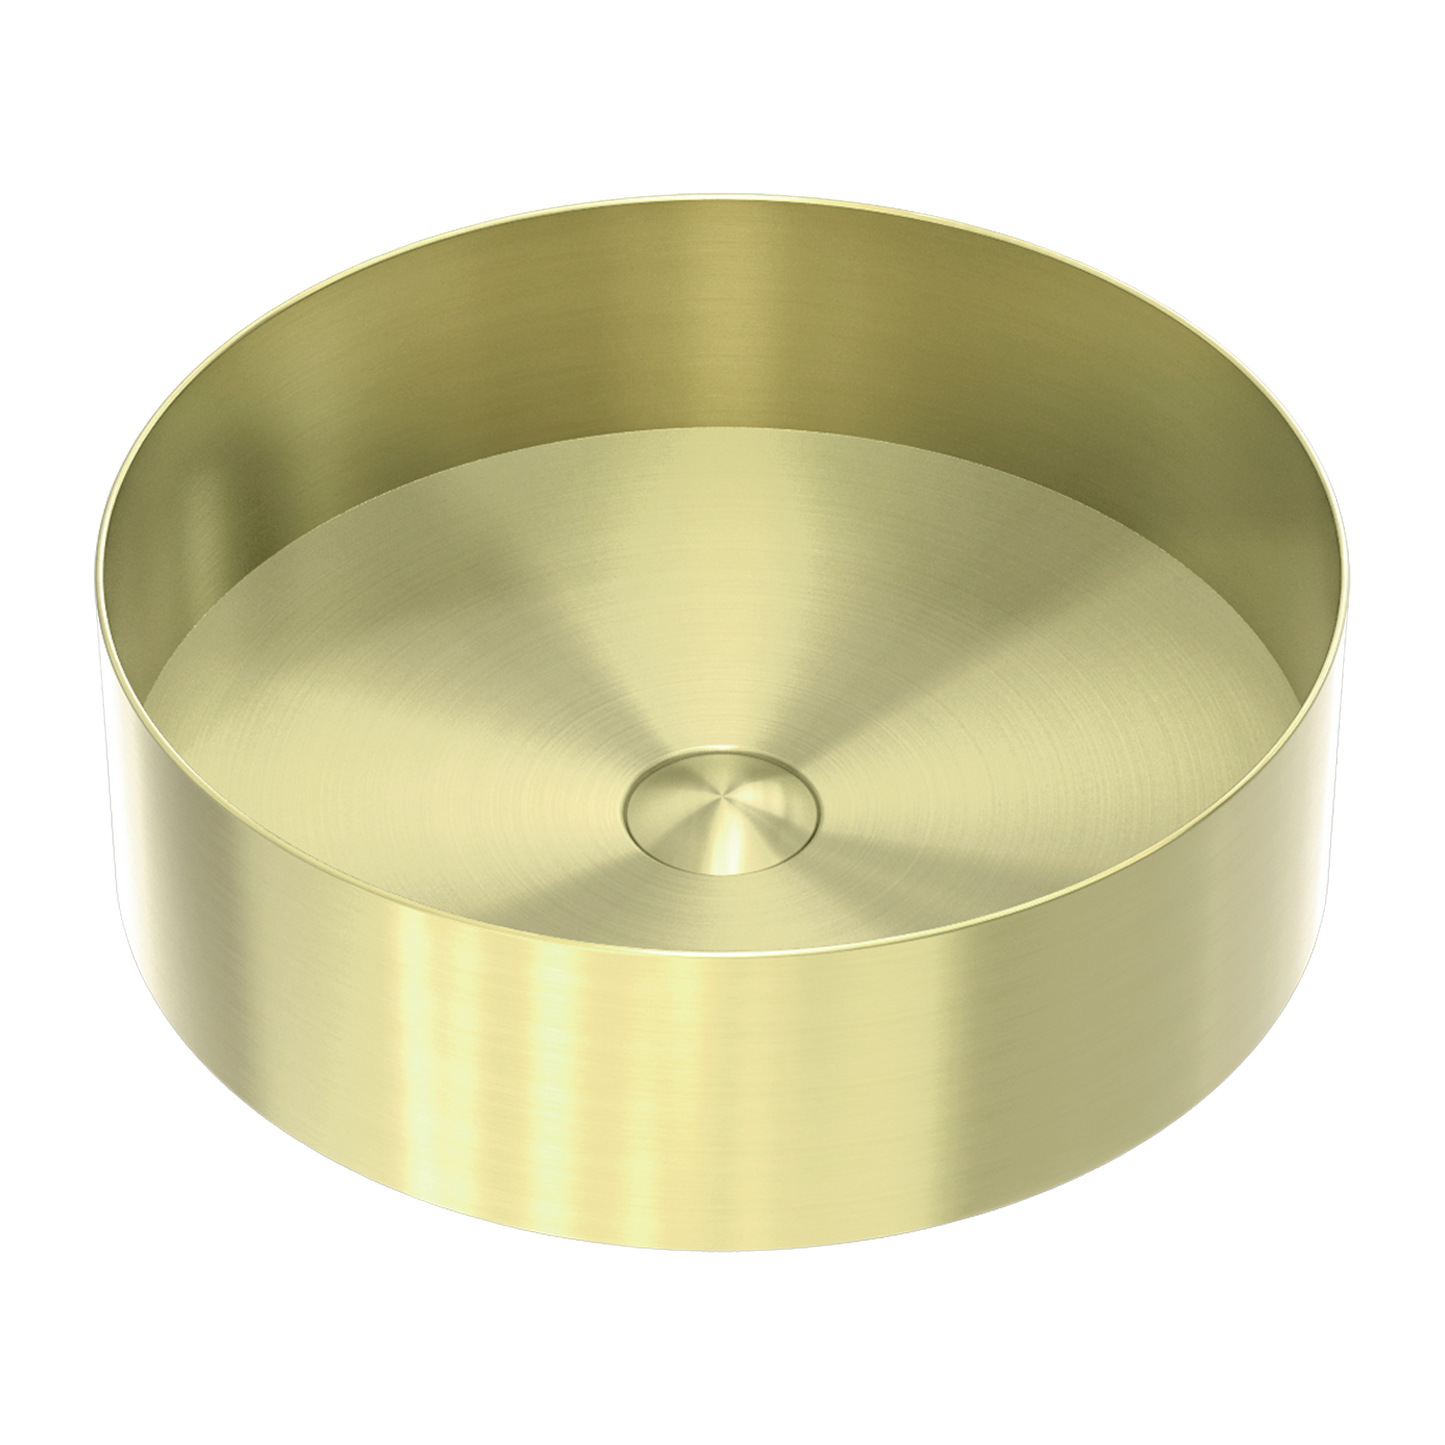 Opal Stainless Steel Round Counter Top Basin - Brushed Gold with PVD Coating